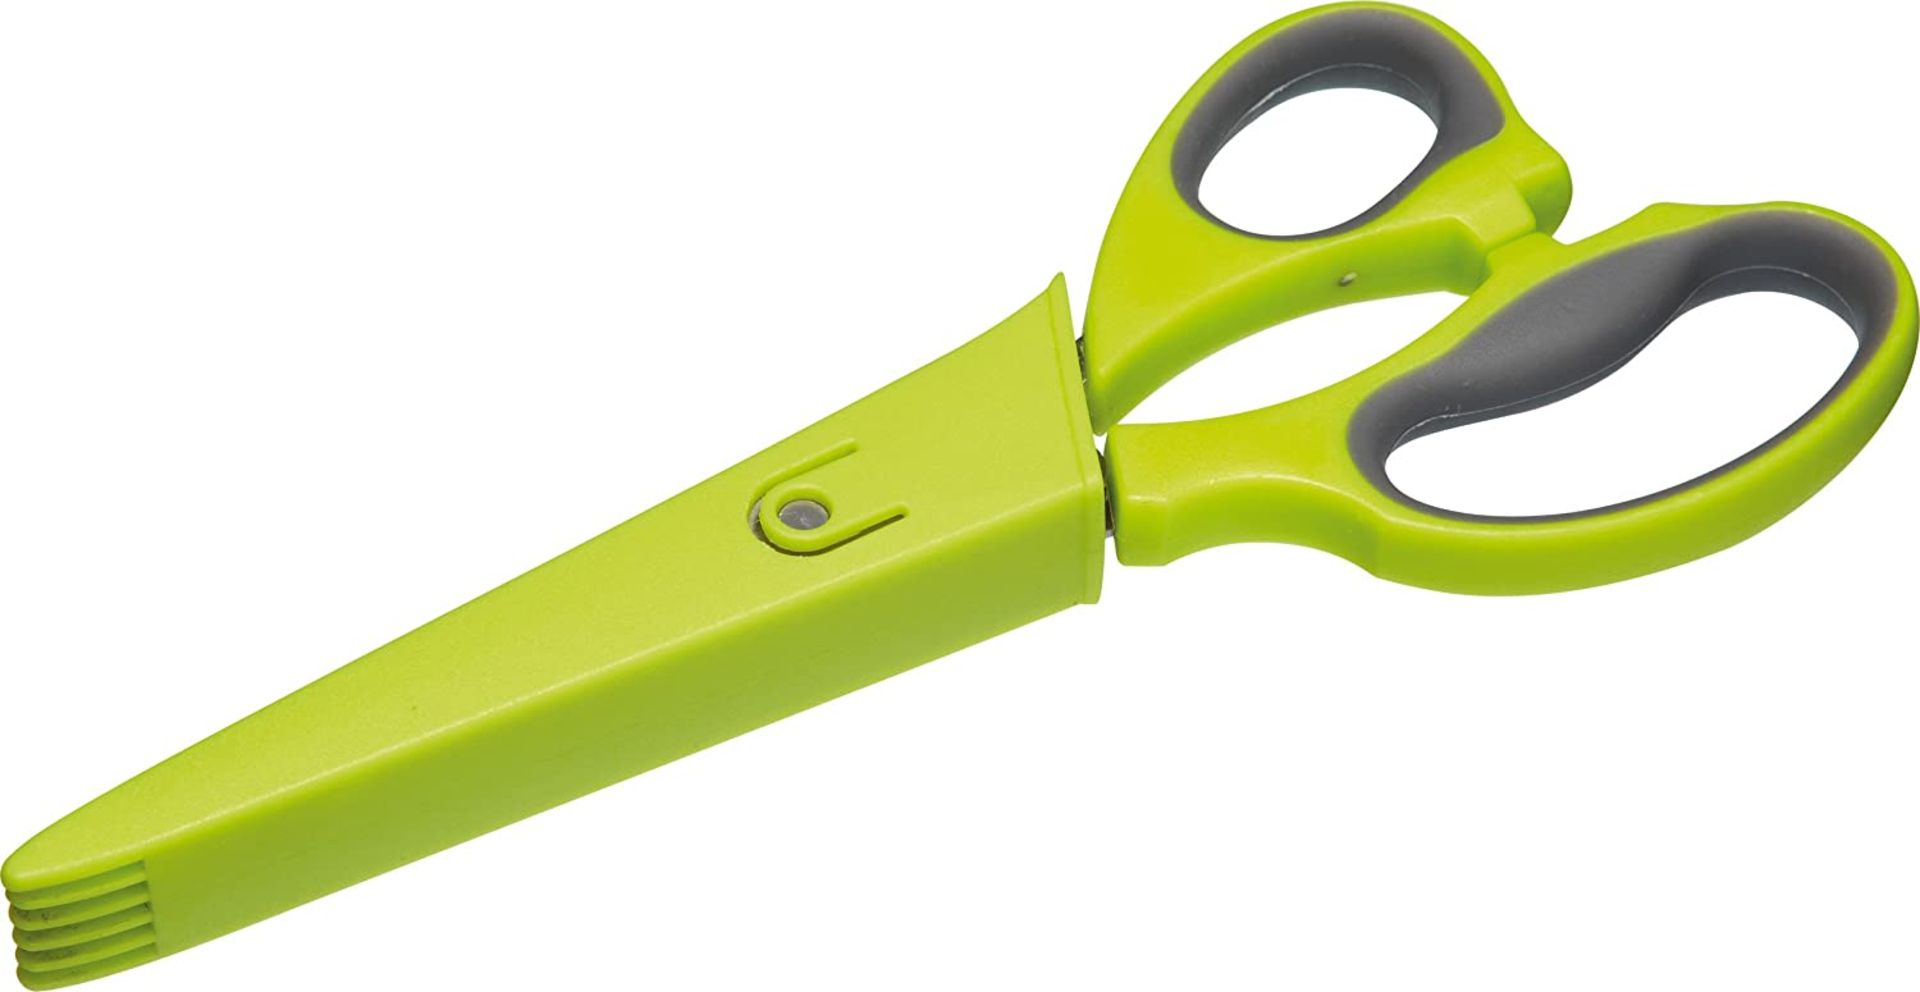 X2 BRAND NEW GARDEN CHEF HERB SCISSORS AND CASE - RRP £7.49 EACH - Image 2 of 2